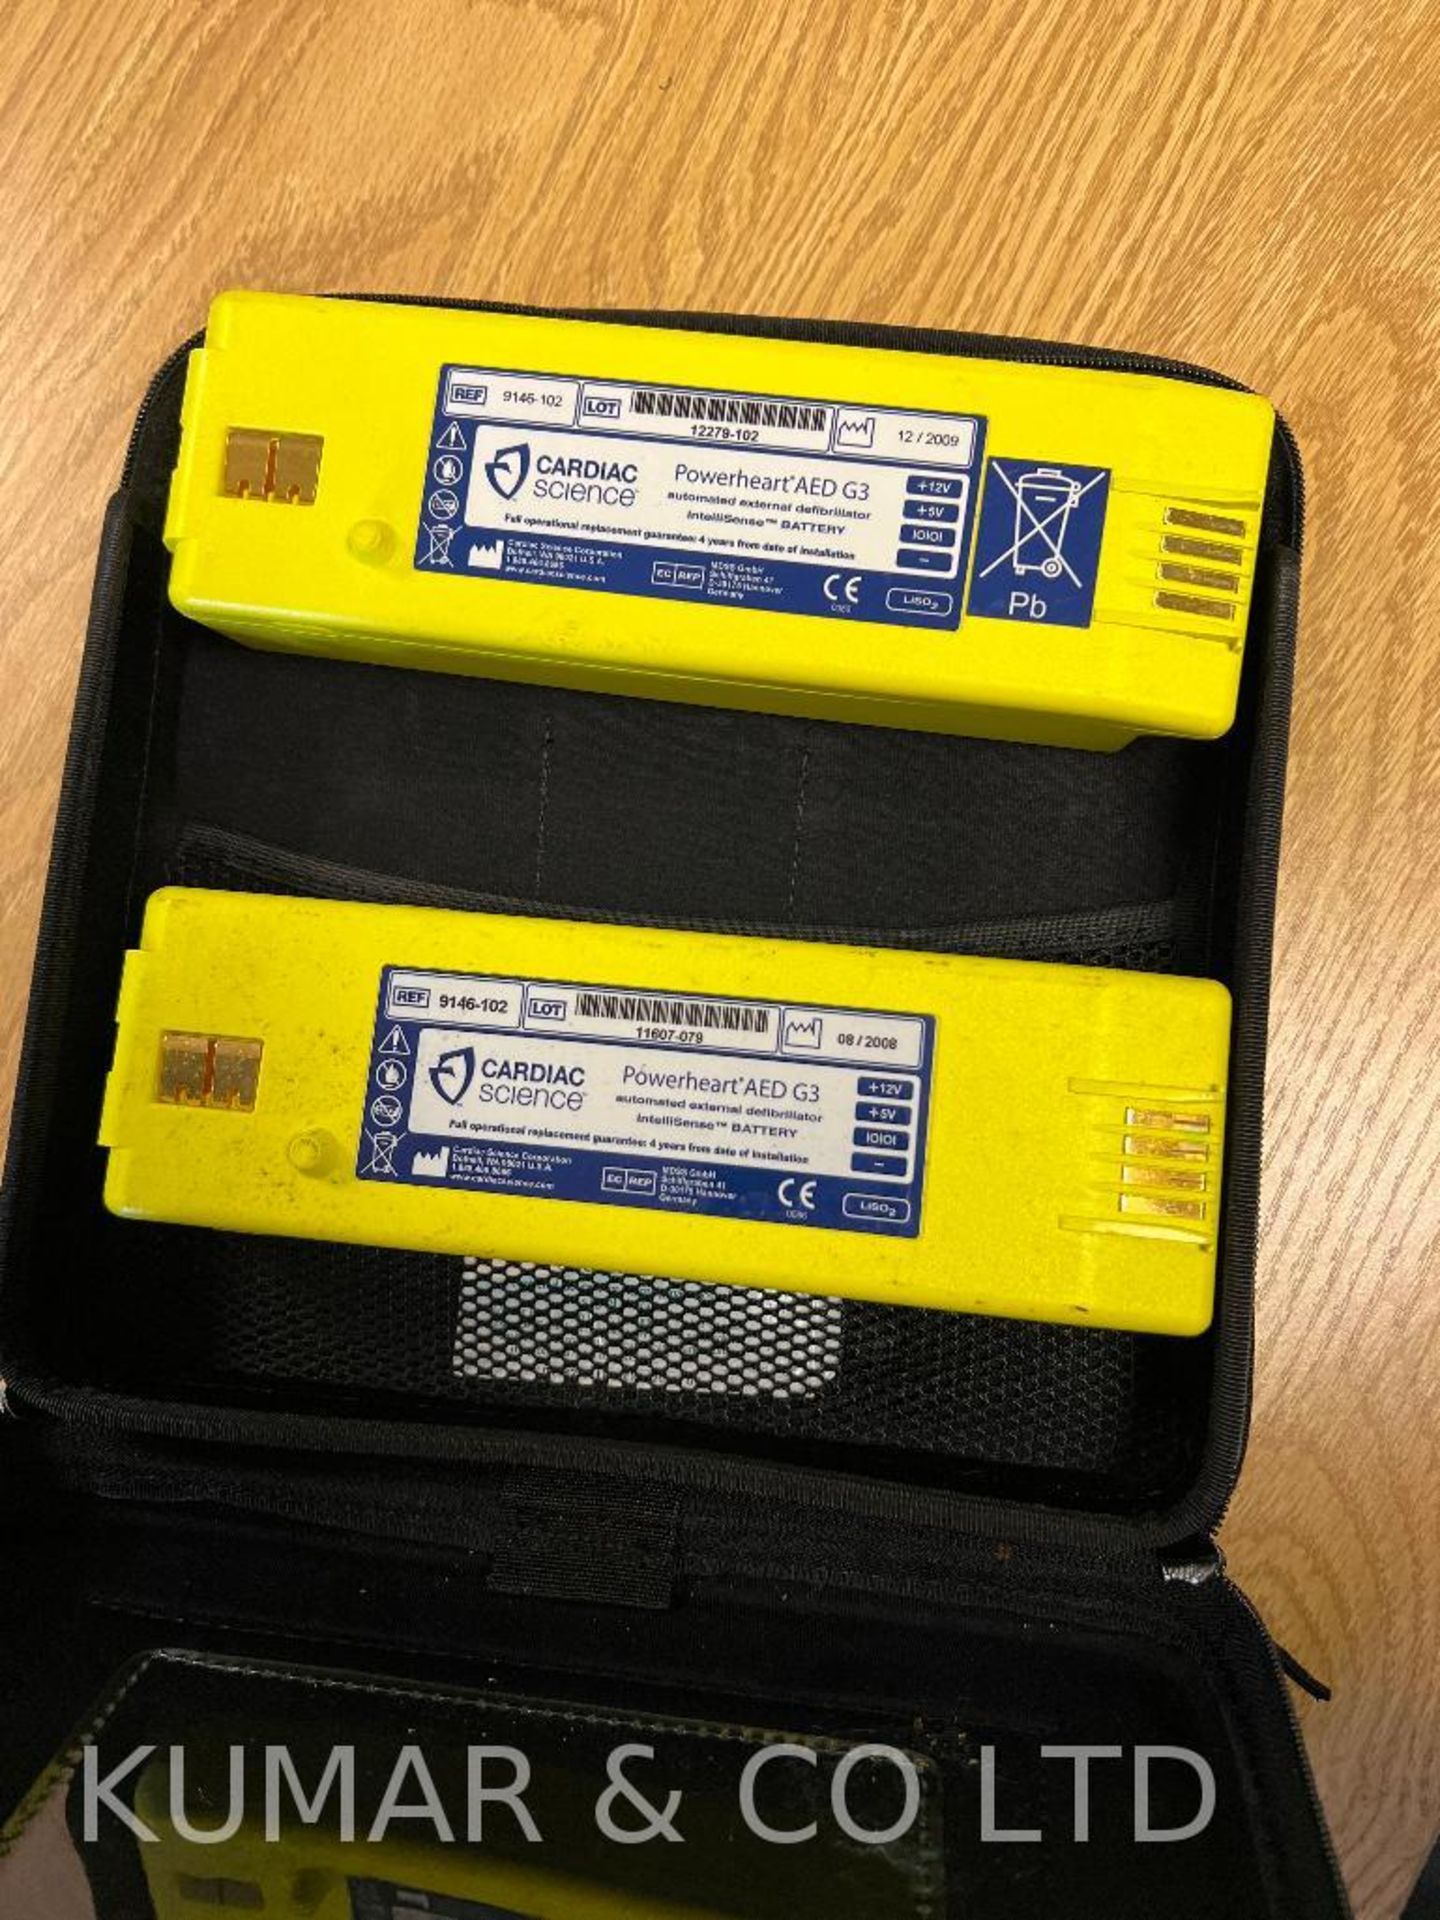 Cardiac Science Power Heart AED G3 Automatic External Defibrillator with 2x Batteries in Carry Case - Image 4 of 4